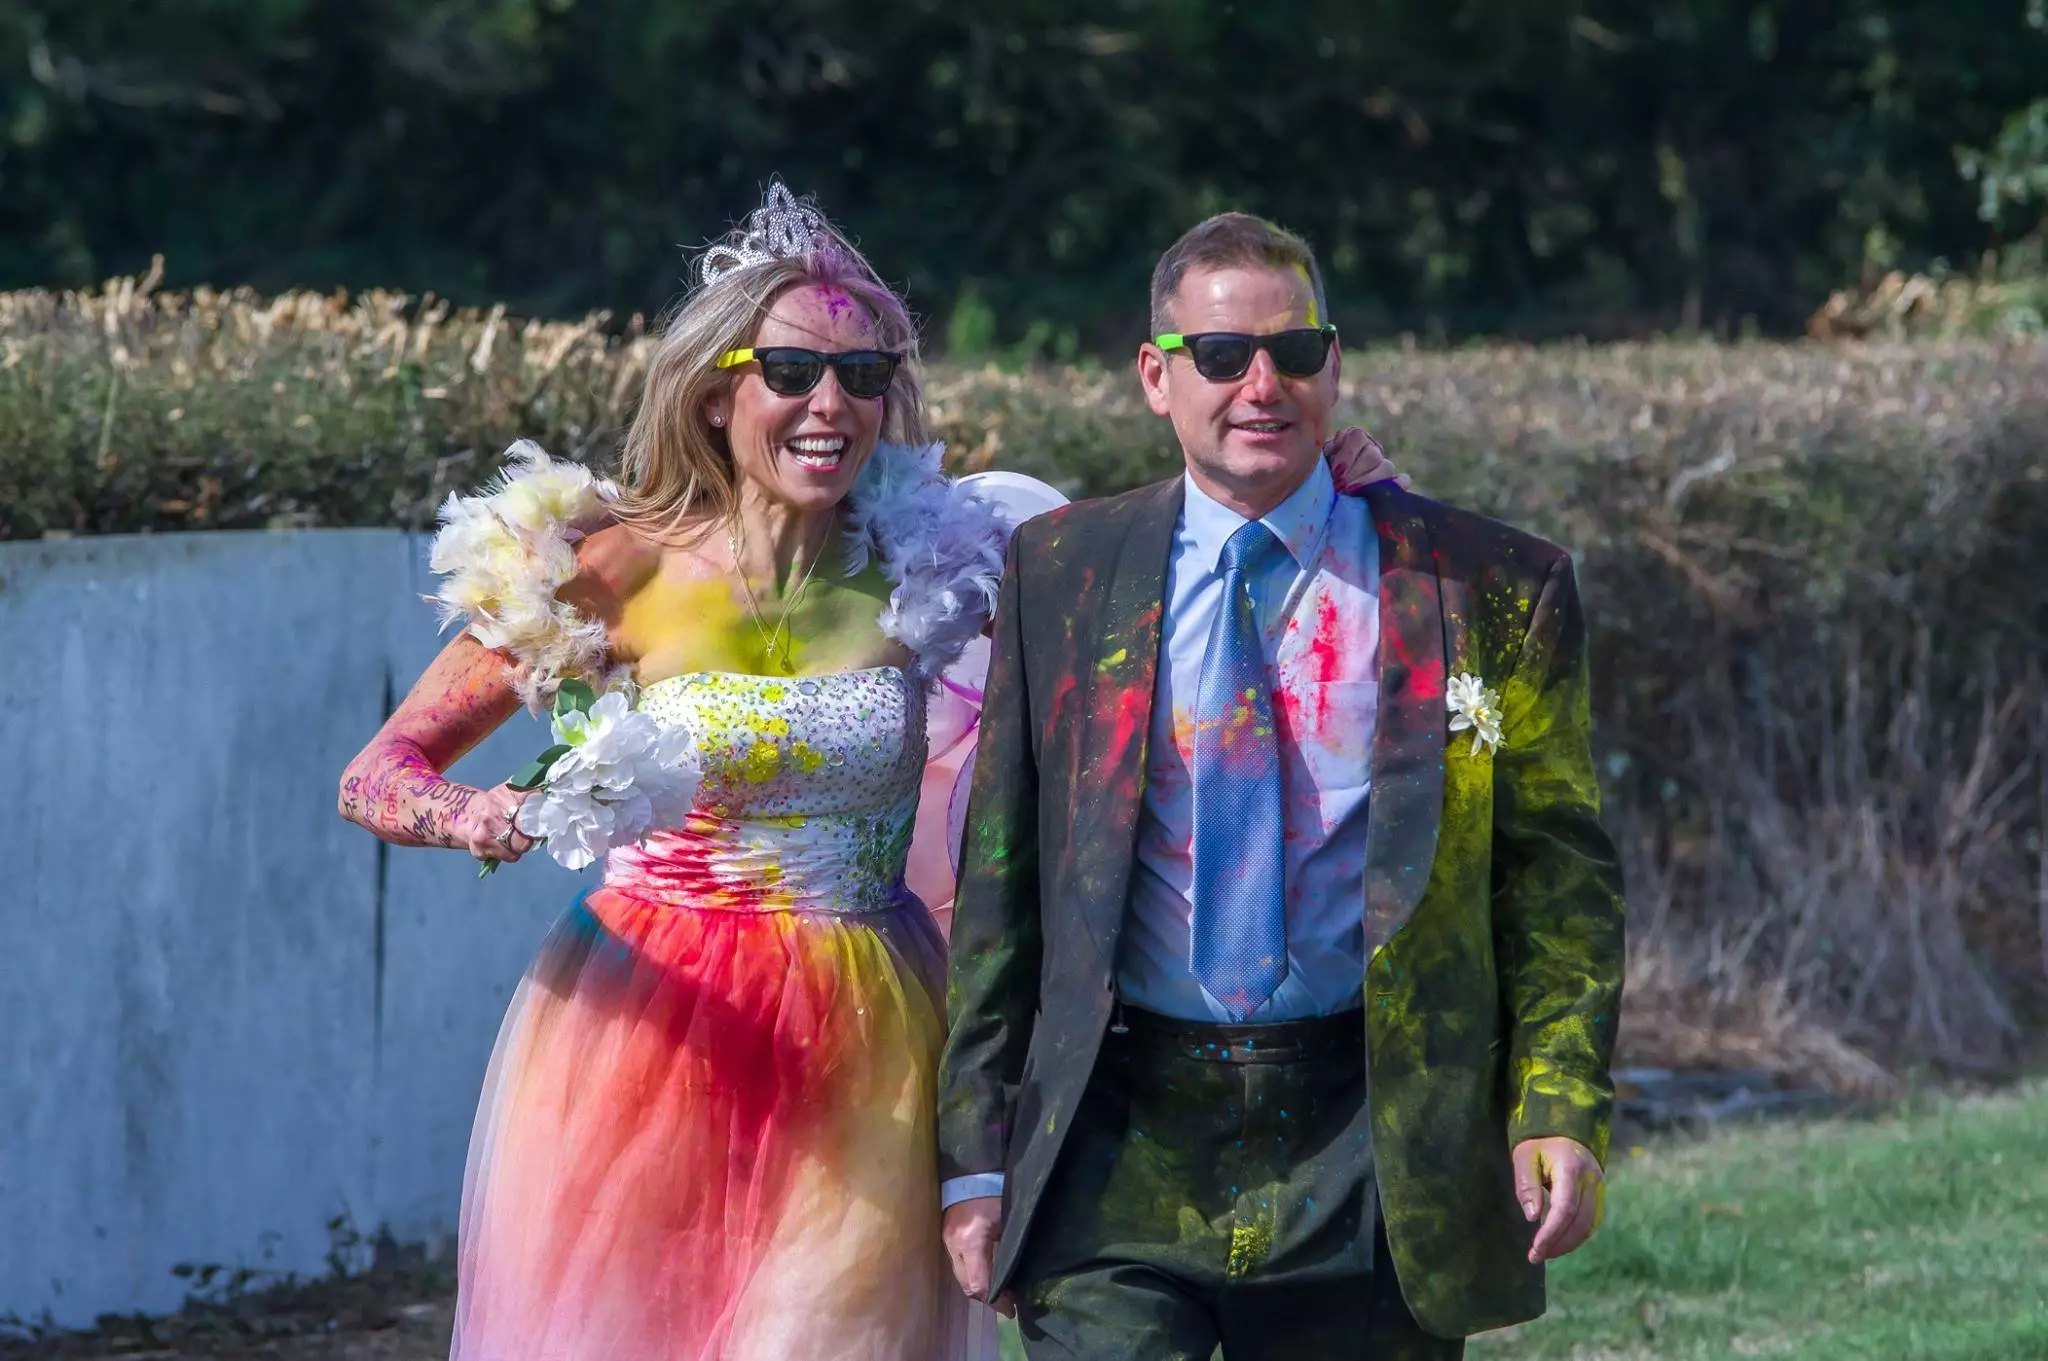 Michelle and John taking part in the Age UK colour run the day after their wedding.